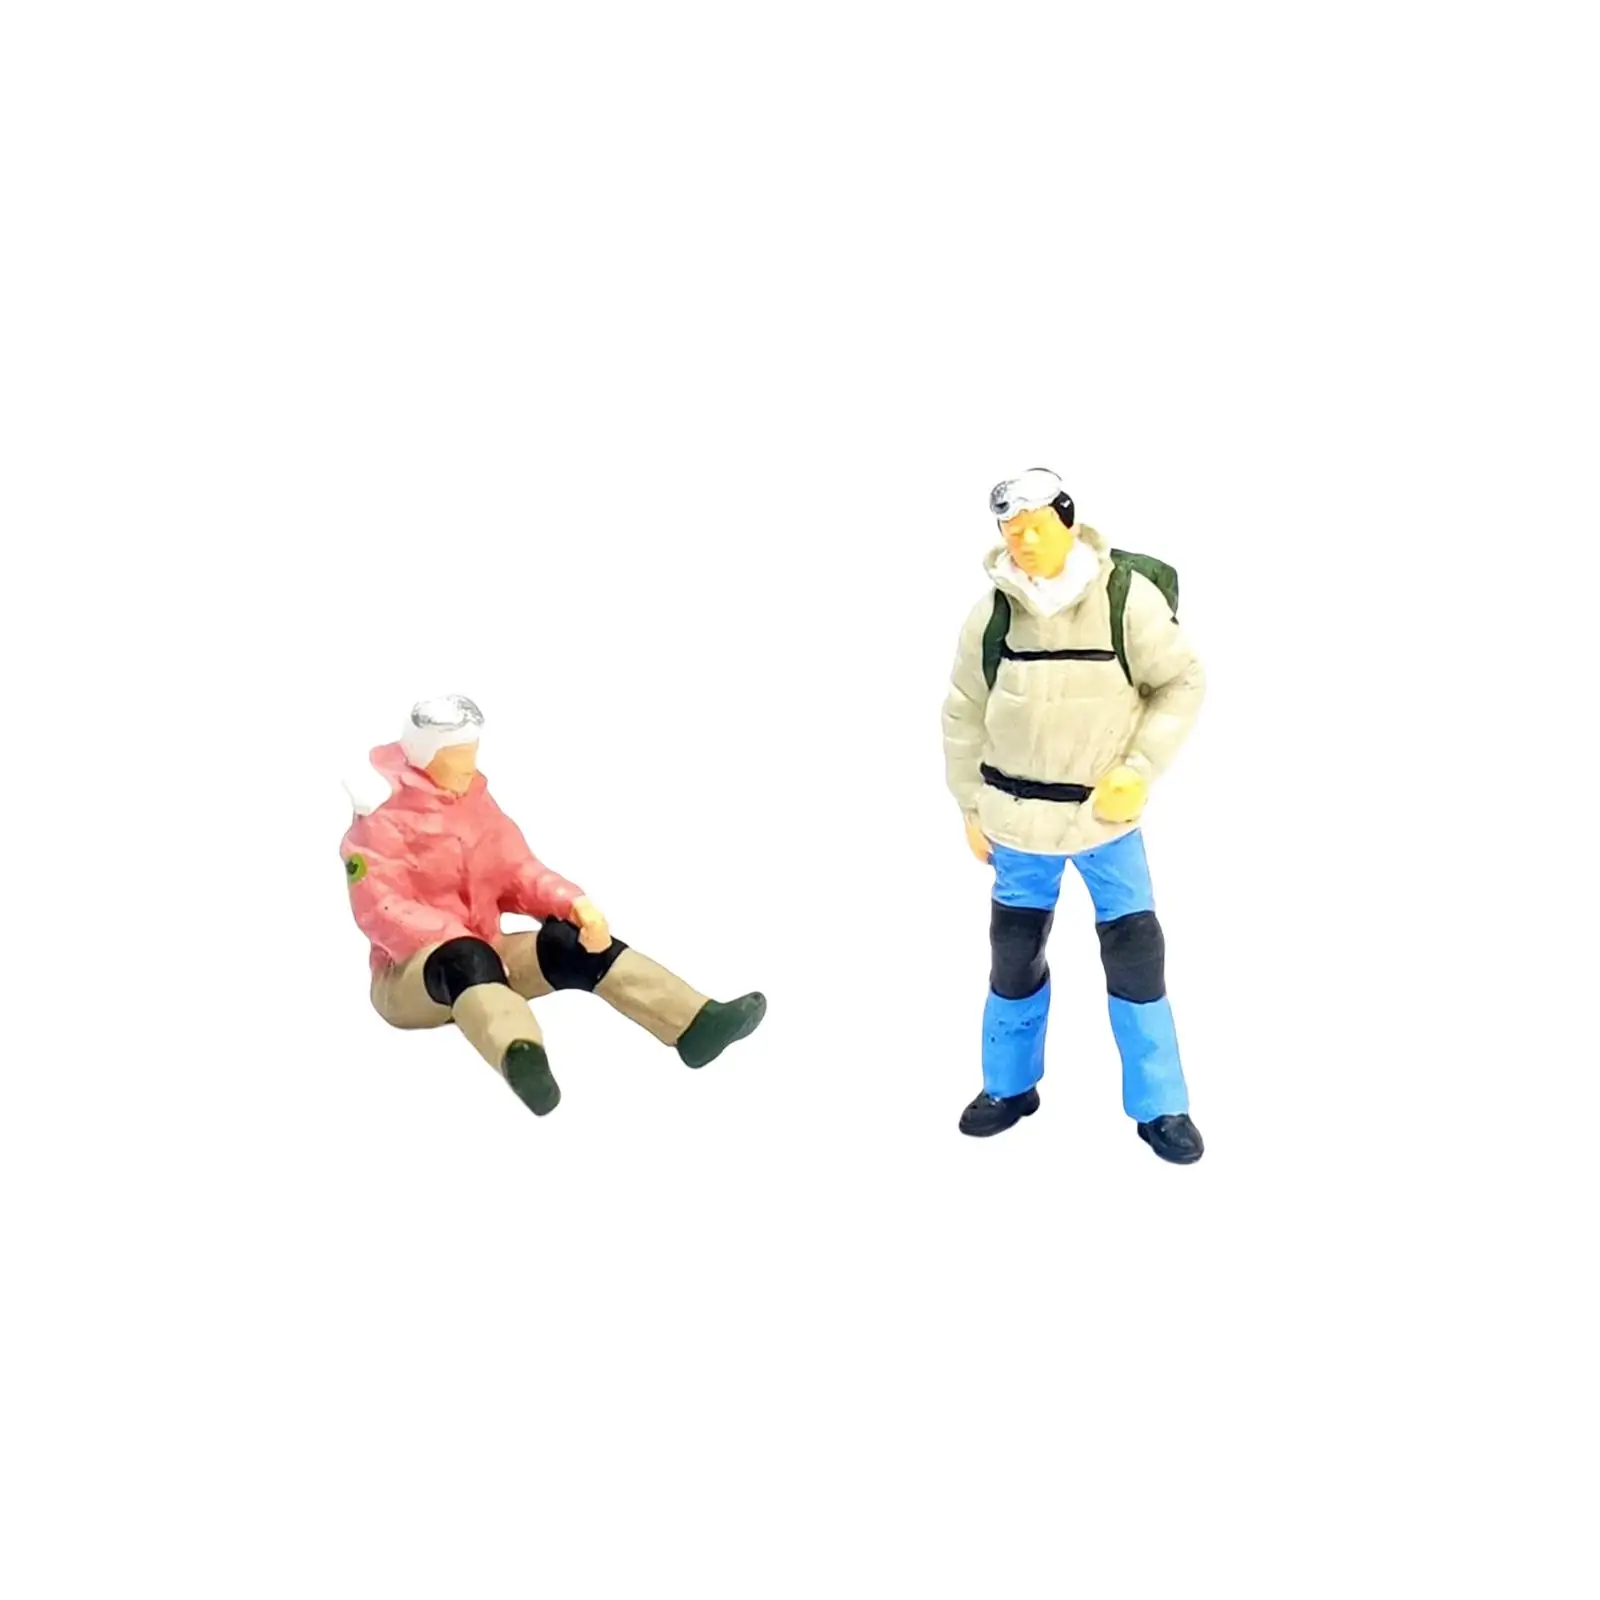 2 Pieces Climbing People Figurines Miniature Model Figures for Dollhouse